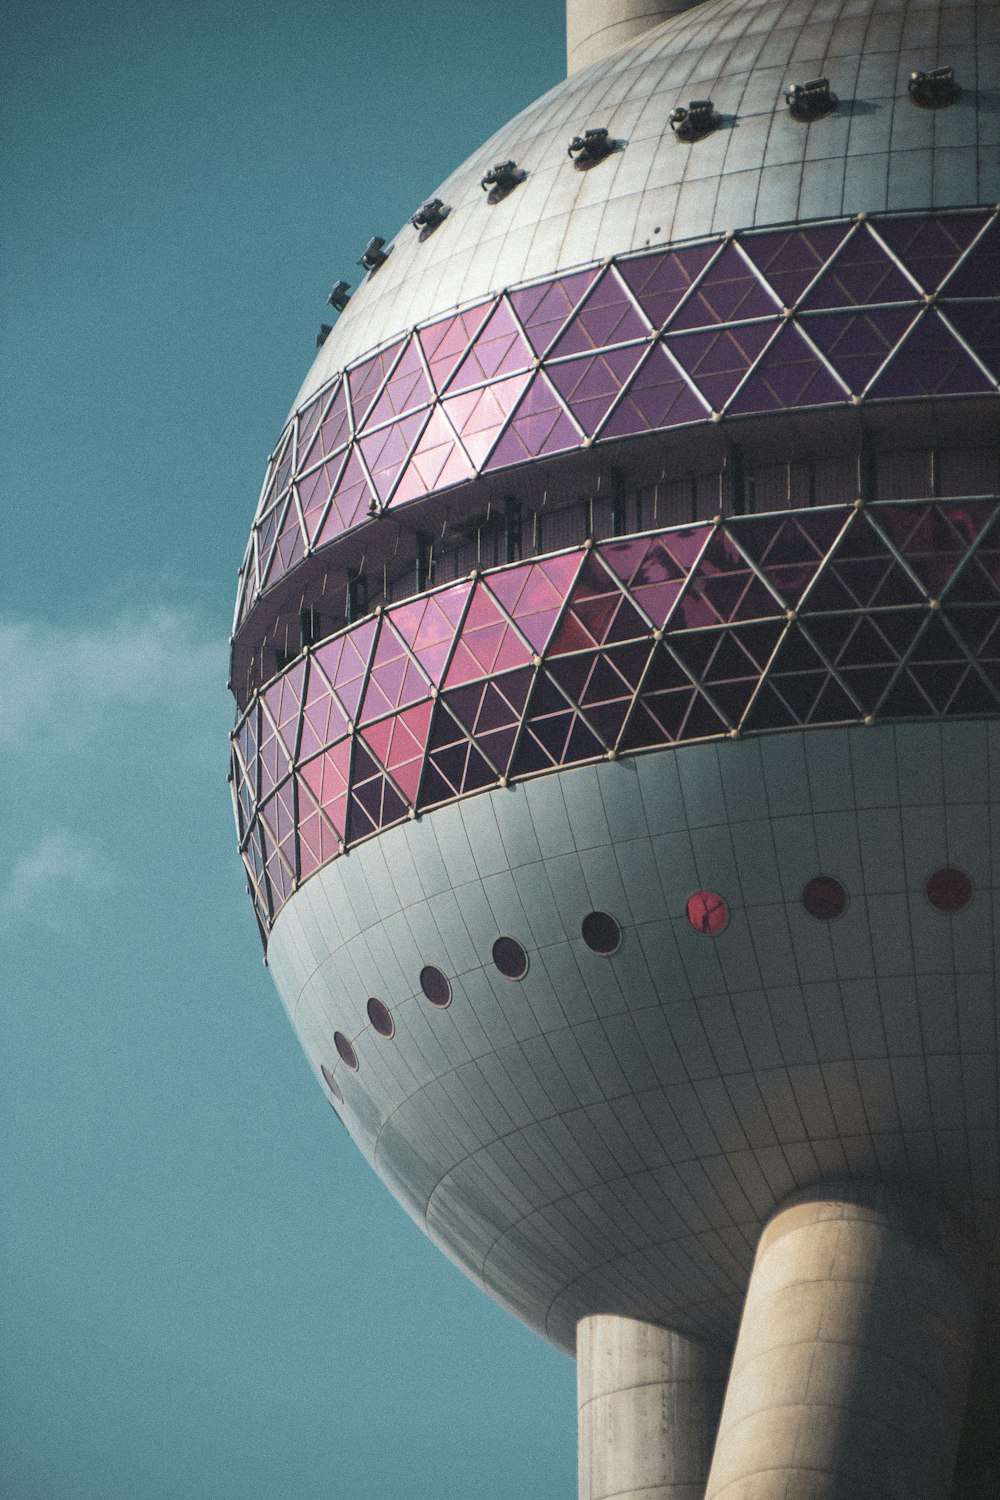 white and purple round building under blue sky during daytime